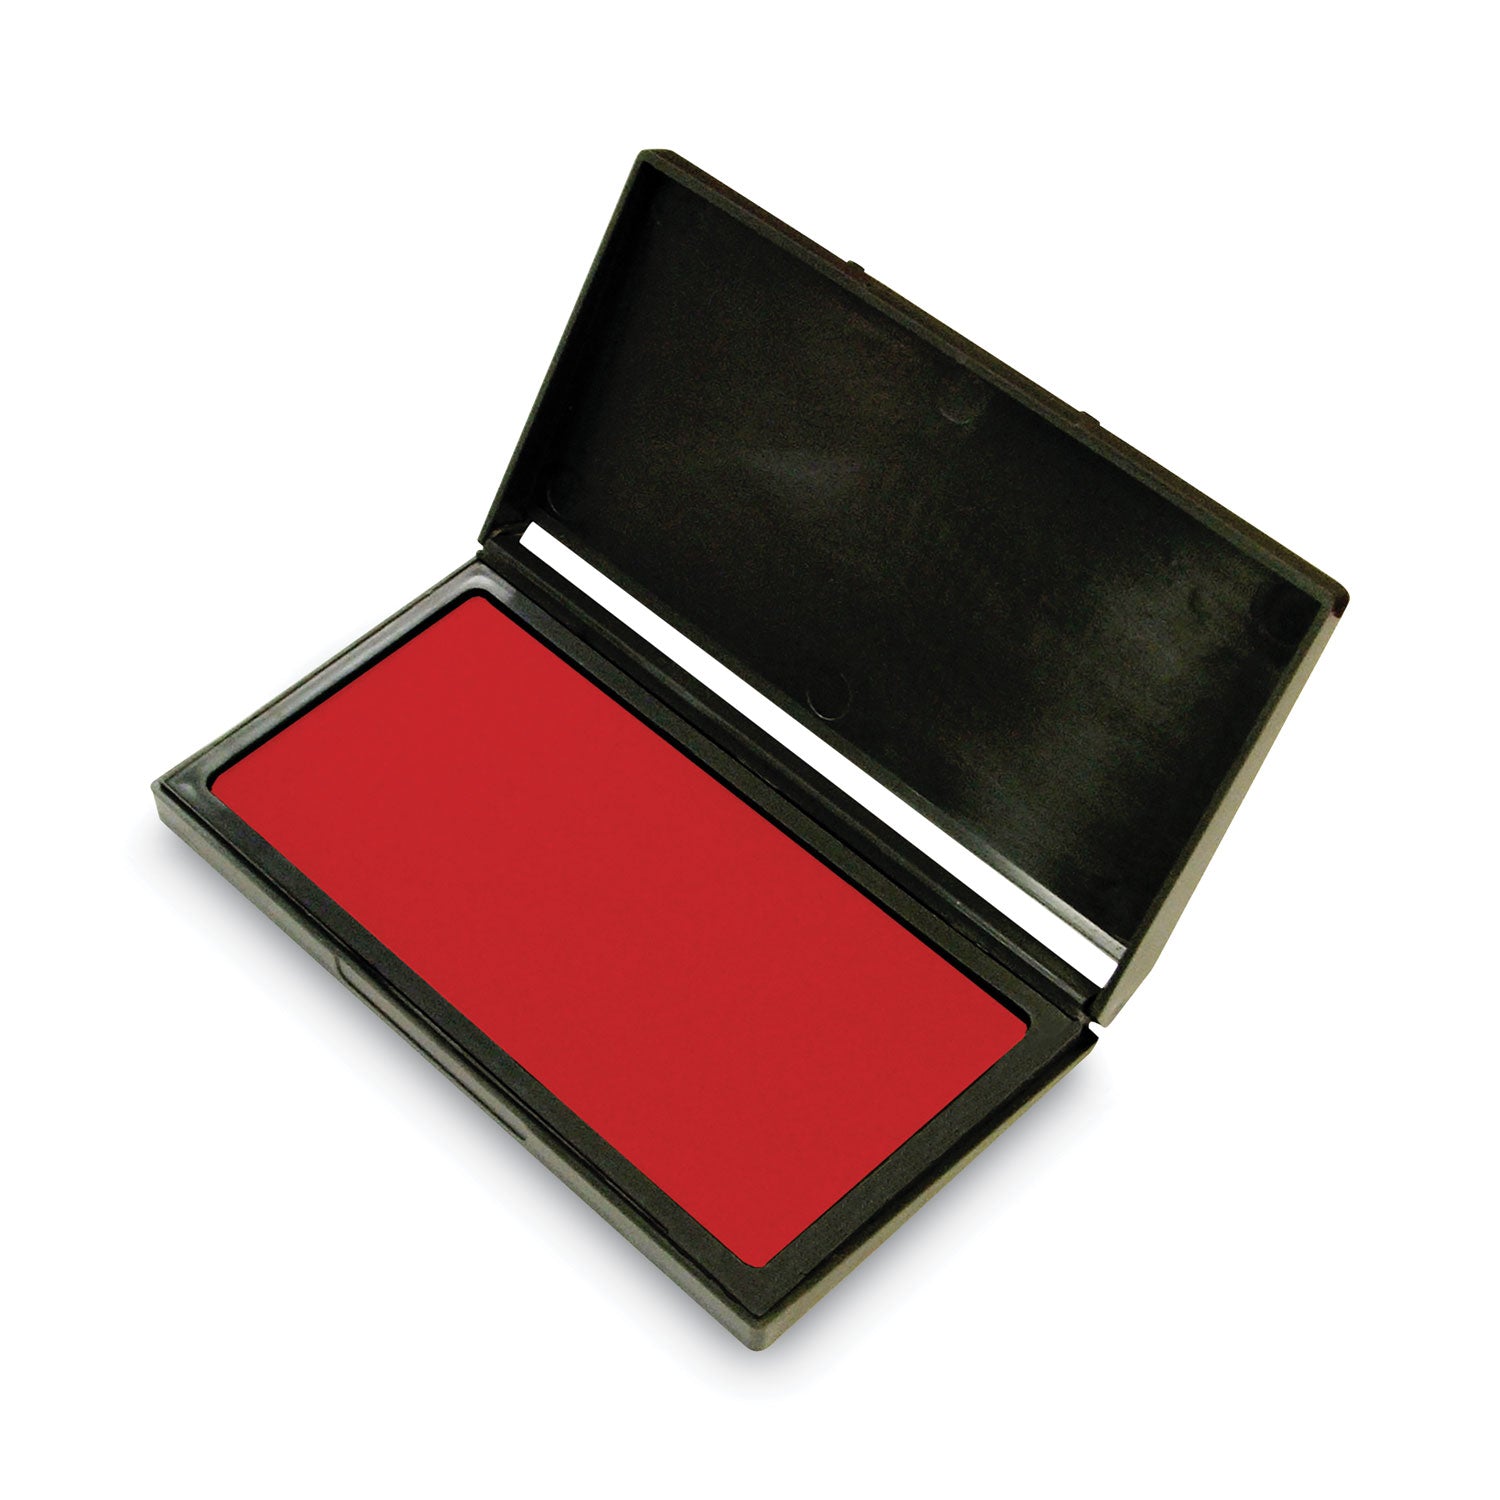 Microgel Stamp Pad for 2000 PLUS, 6.17" x 3.13", Red - 